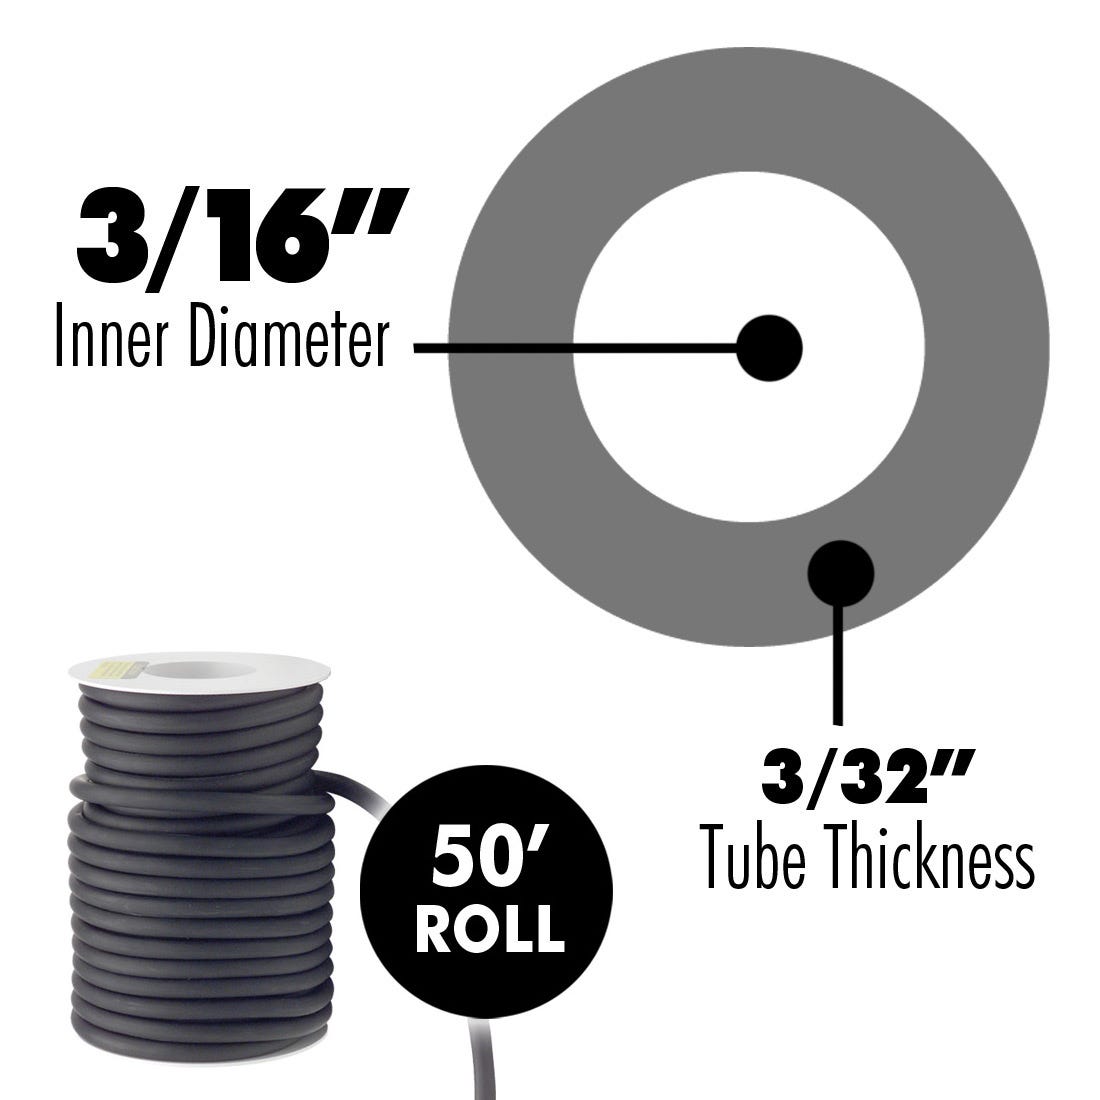 ACE Latex Rubber Tubing Black, 3/16" x 3/32"- 50' Roll